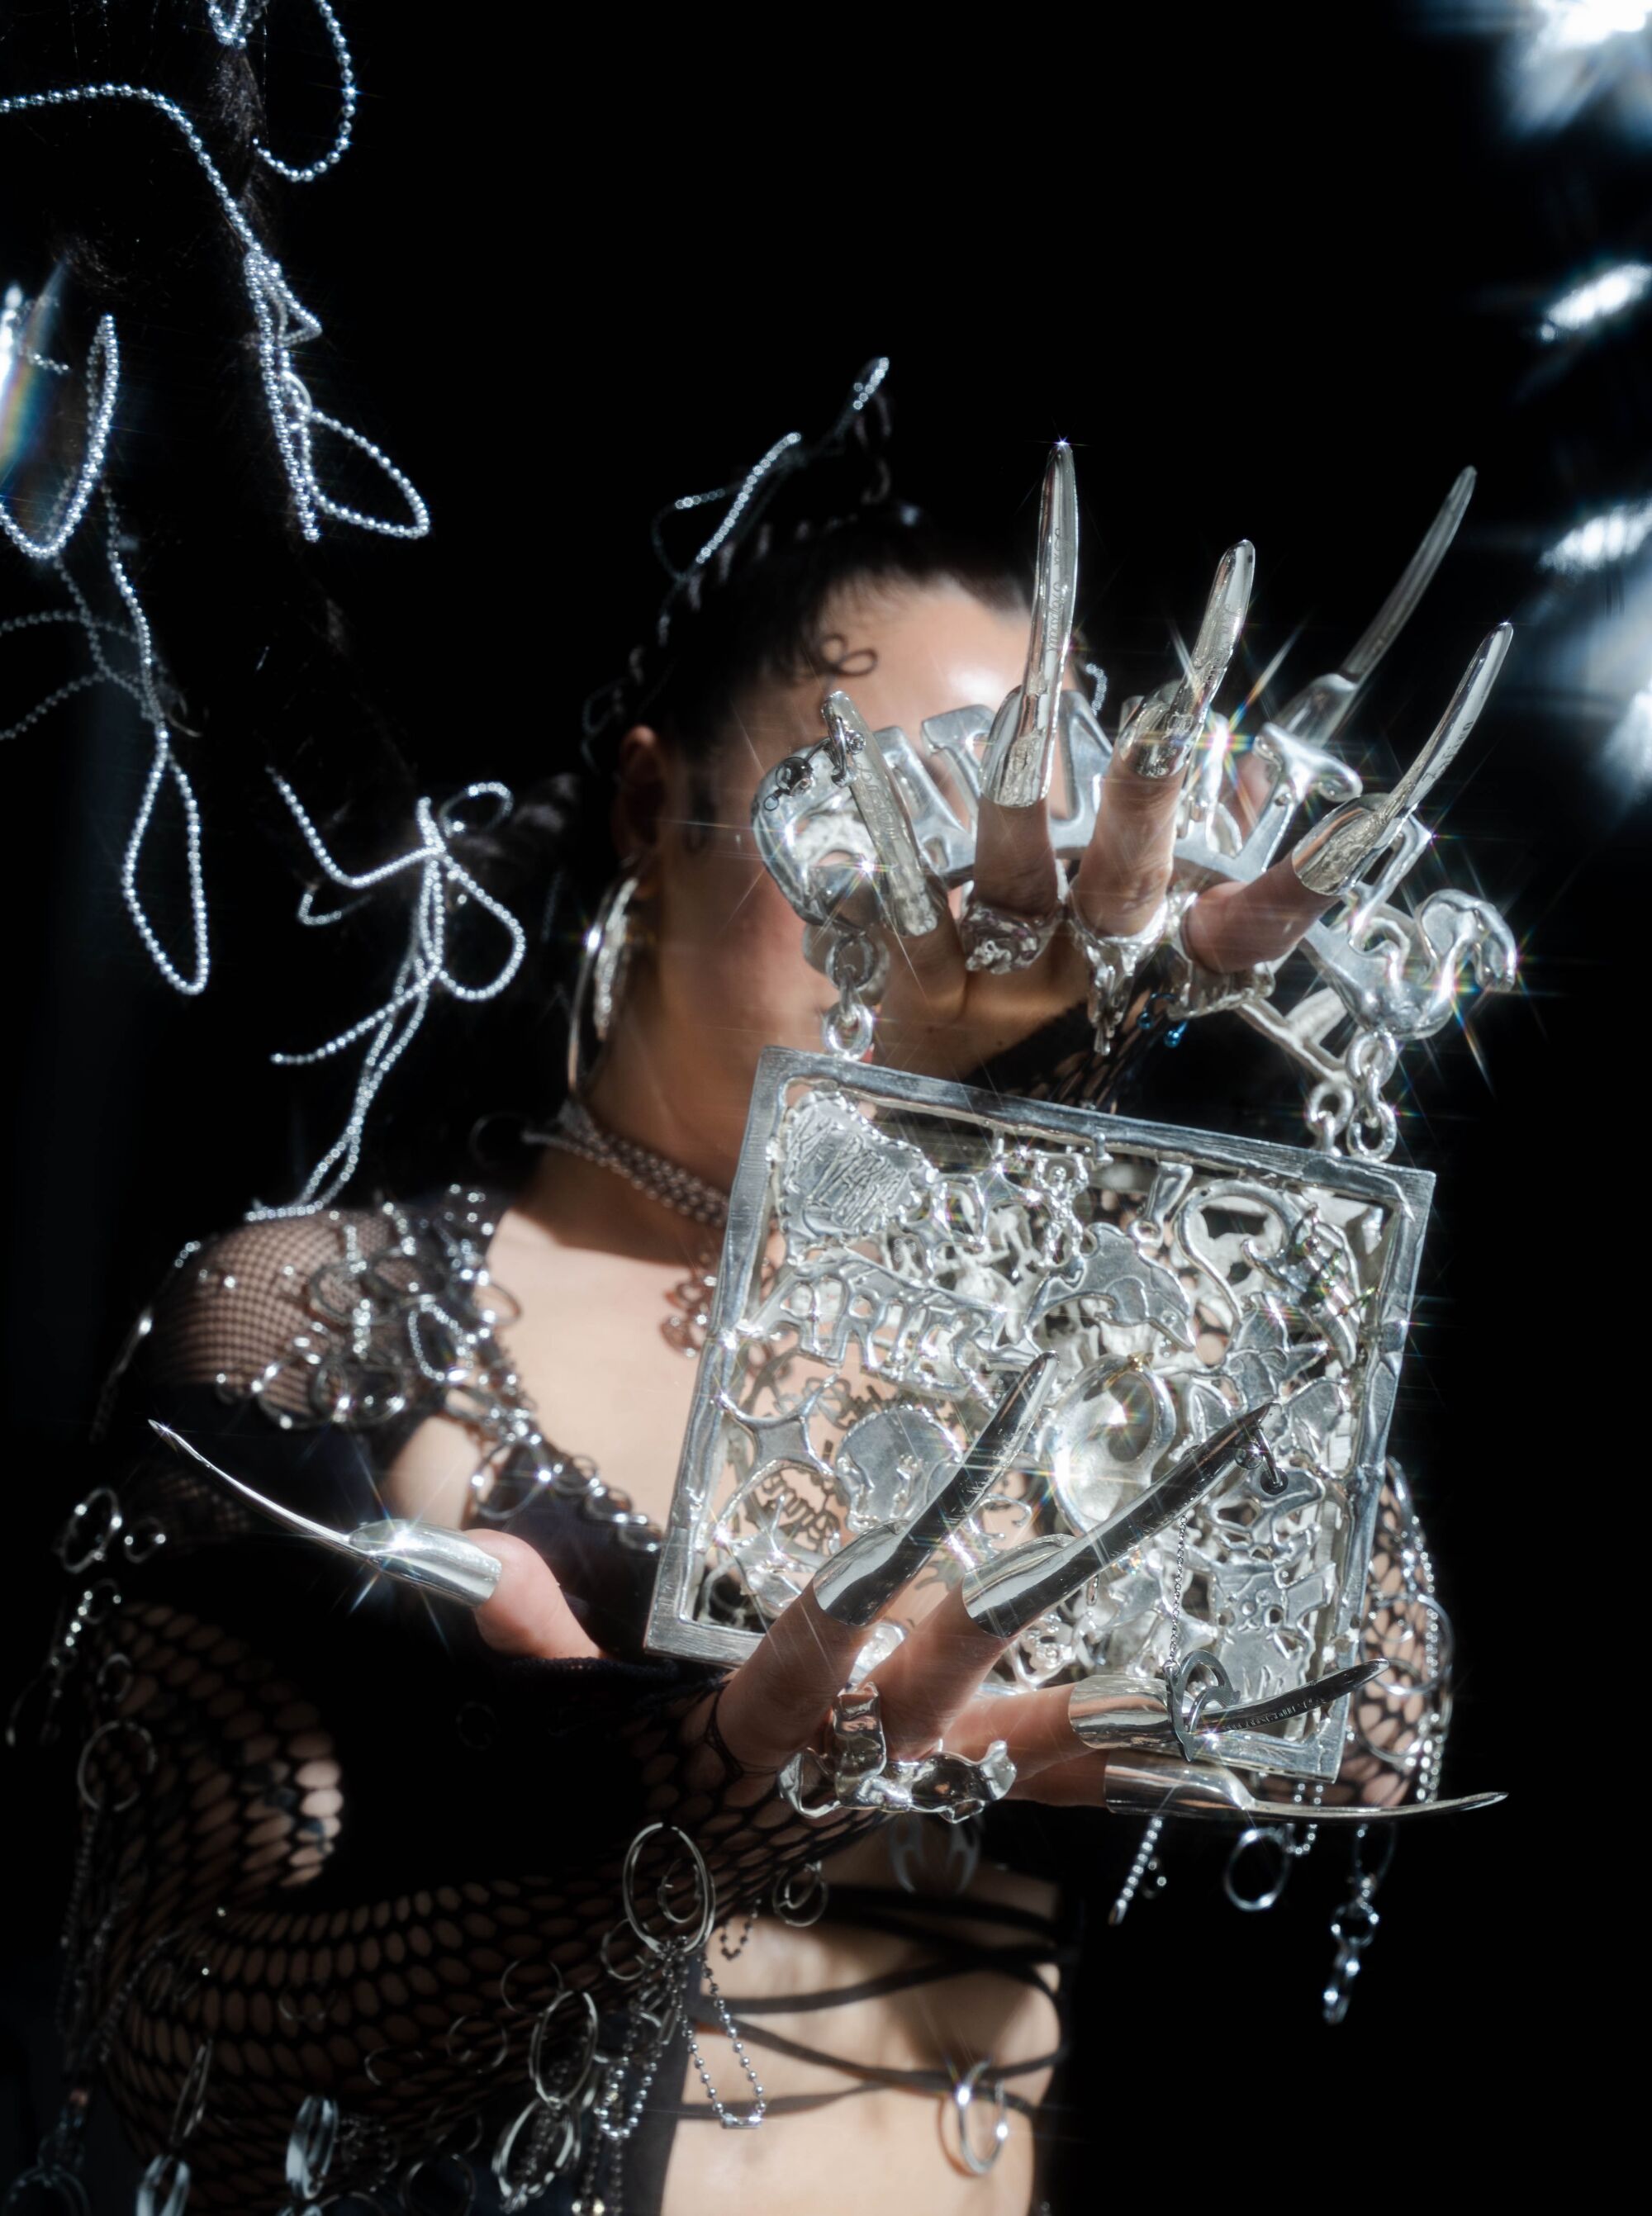 Photo of “KEPERRA” — a sterling silver casted purse made by Georgina Treviño for Image magazine.